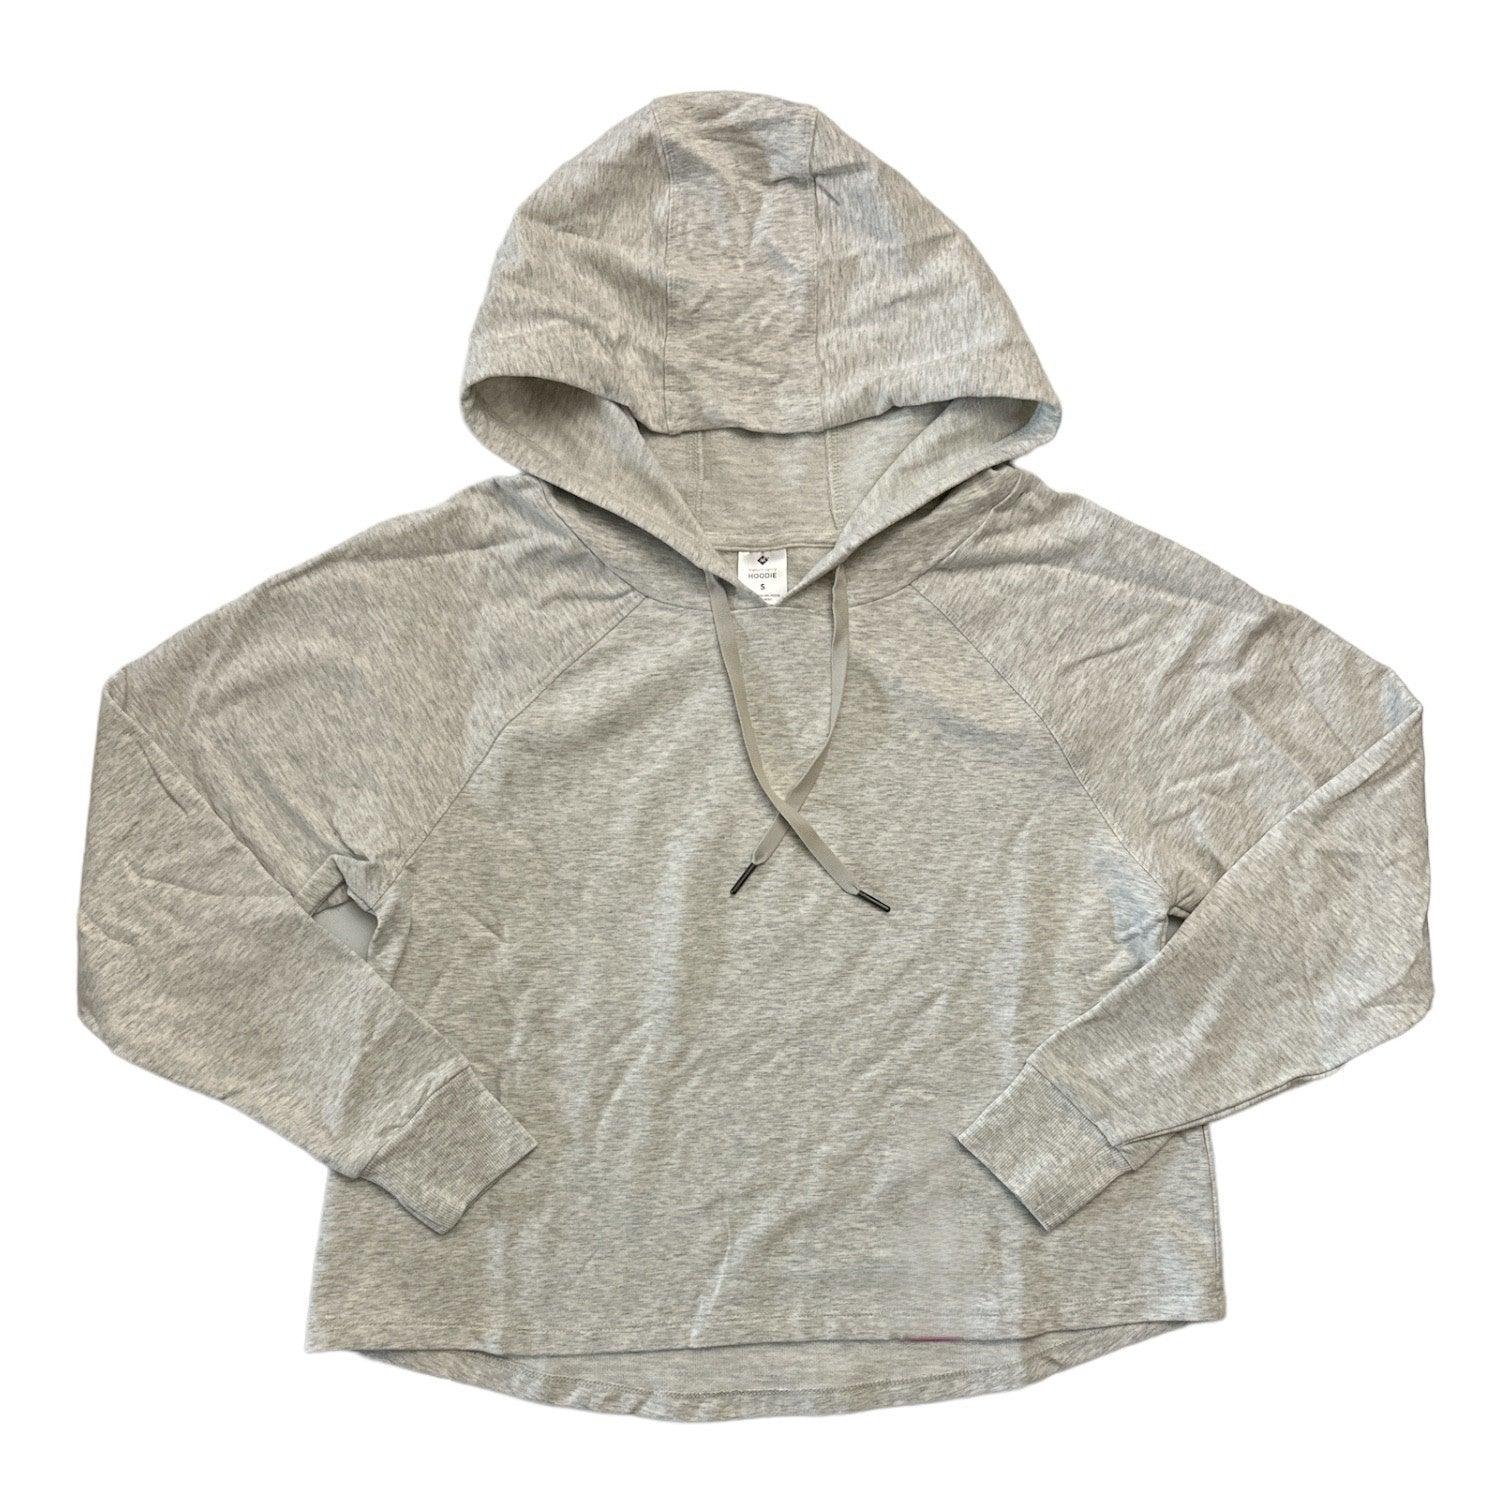 Member's Mark Women's Buttery Soft French Terry Lined Hoodie - Grovano